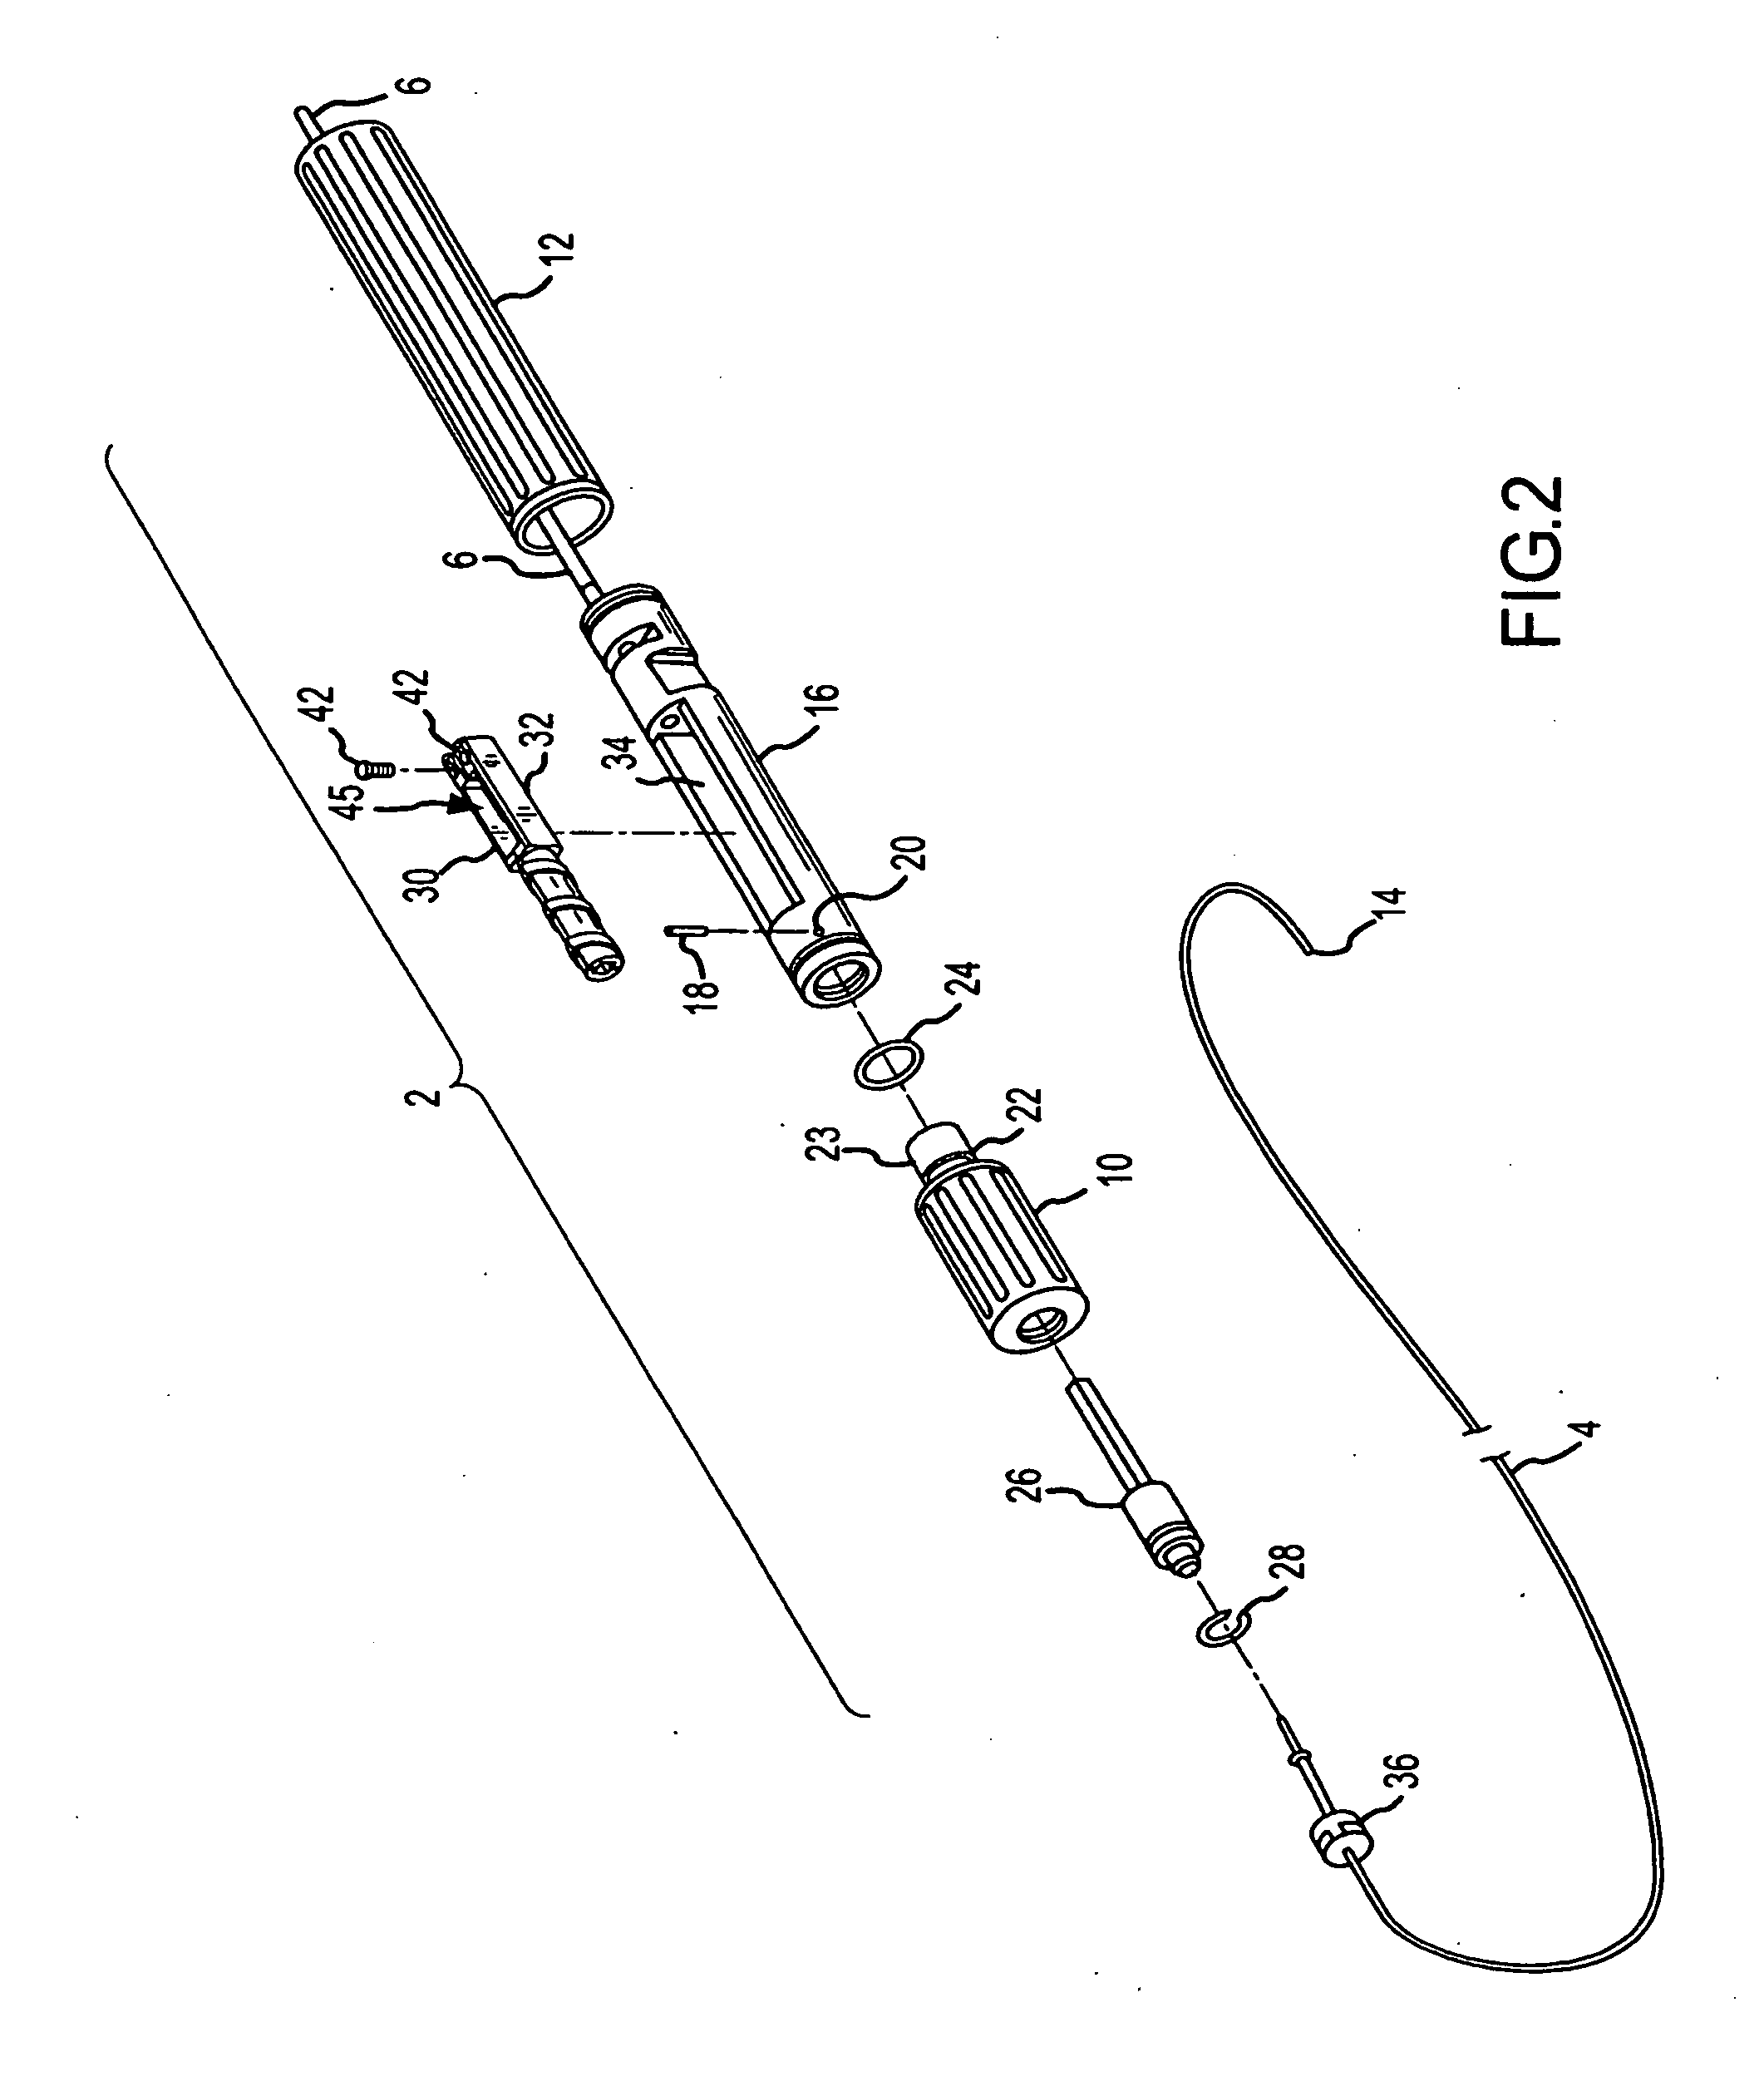 Fixed Dimensional and Bi-Directional Steerable Catheter Control Handle